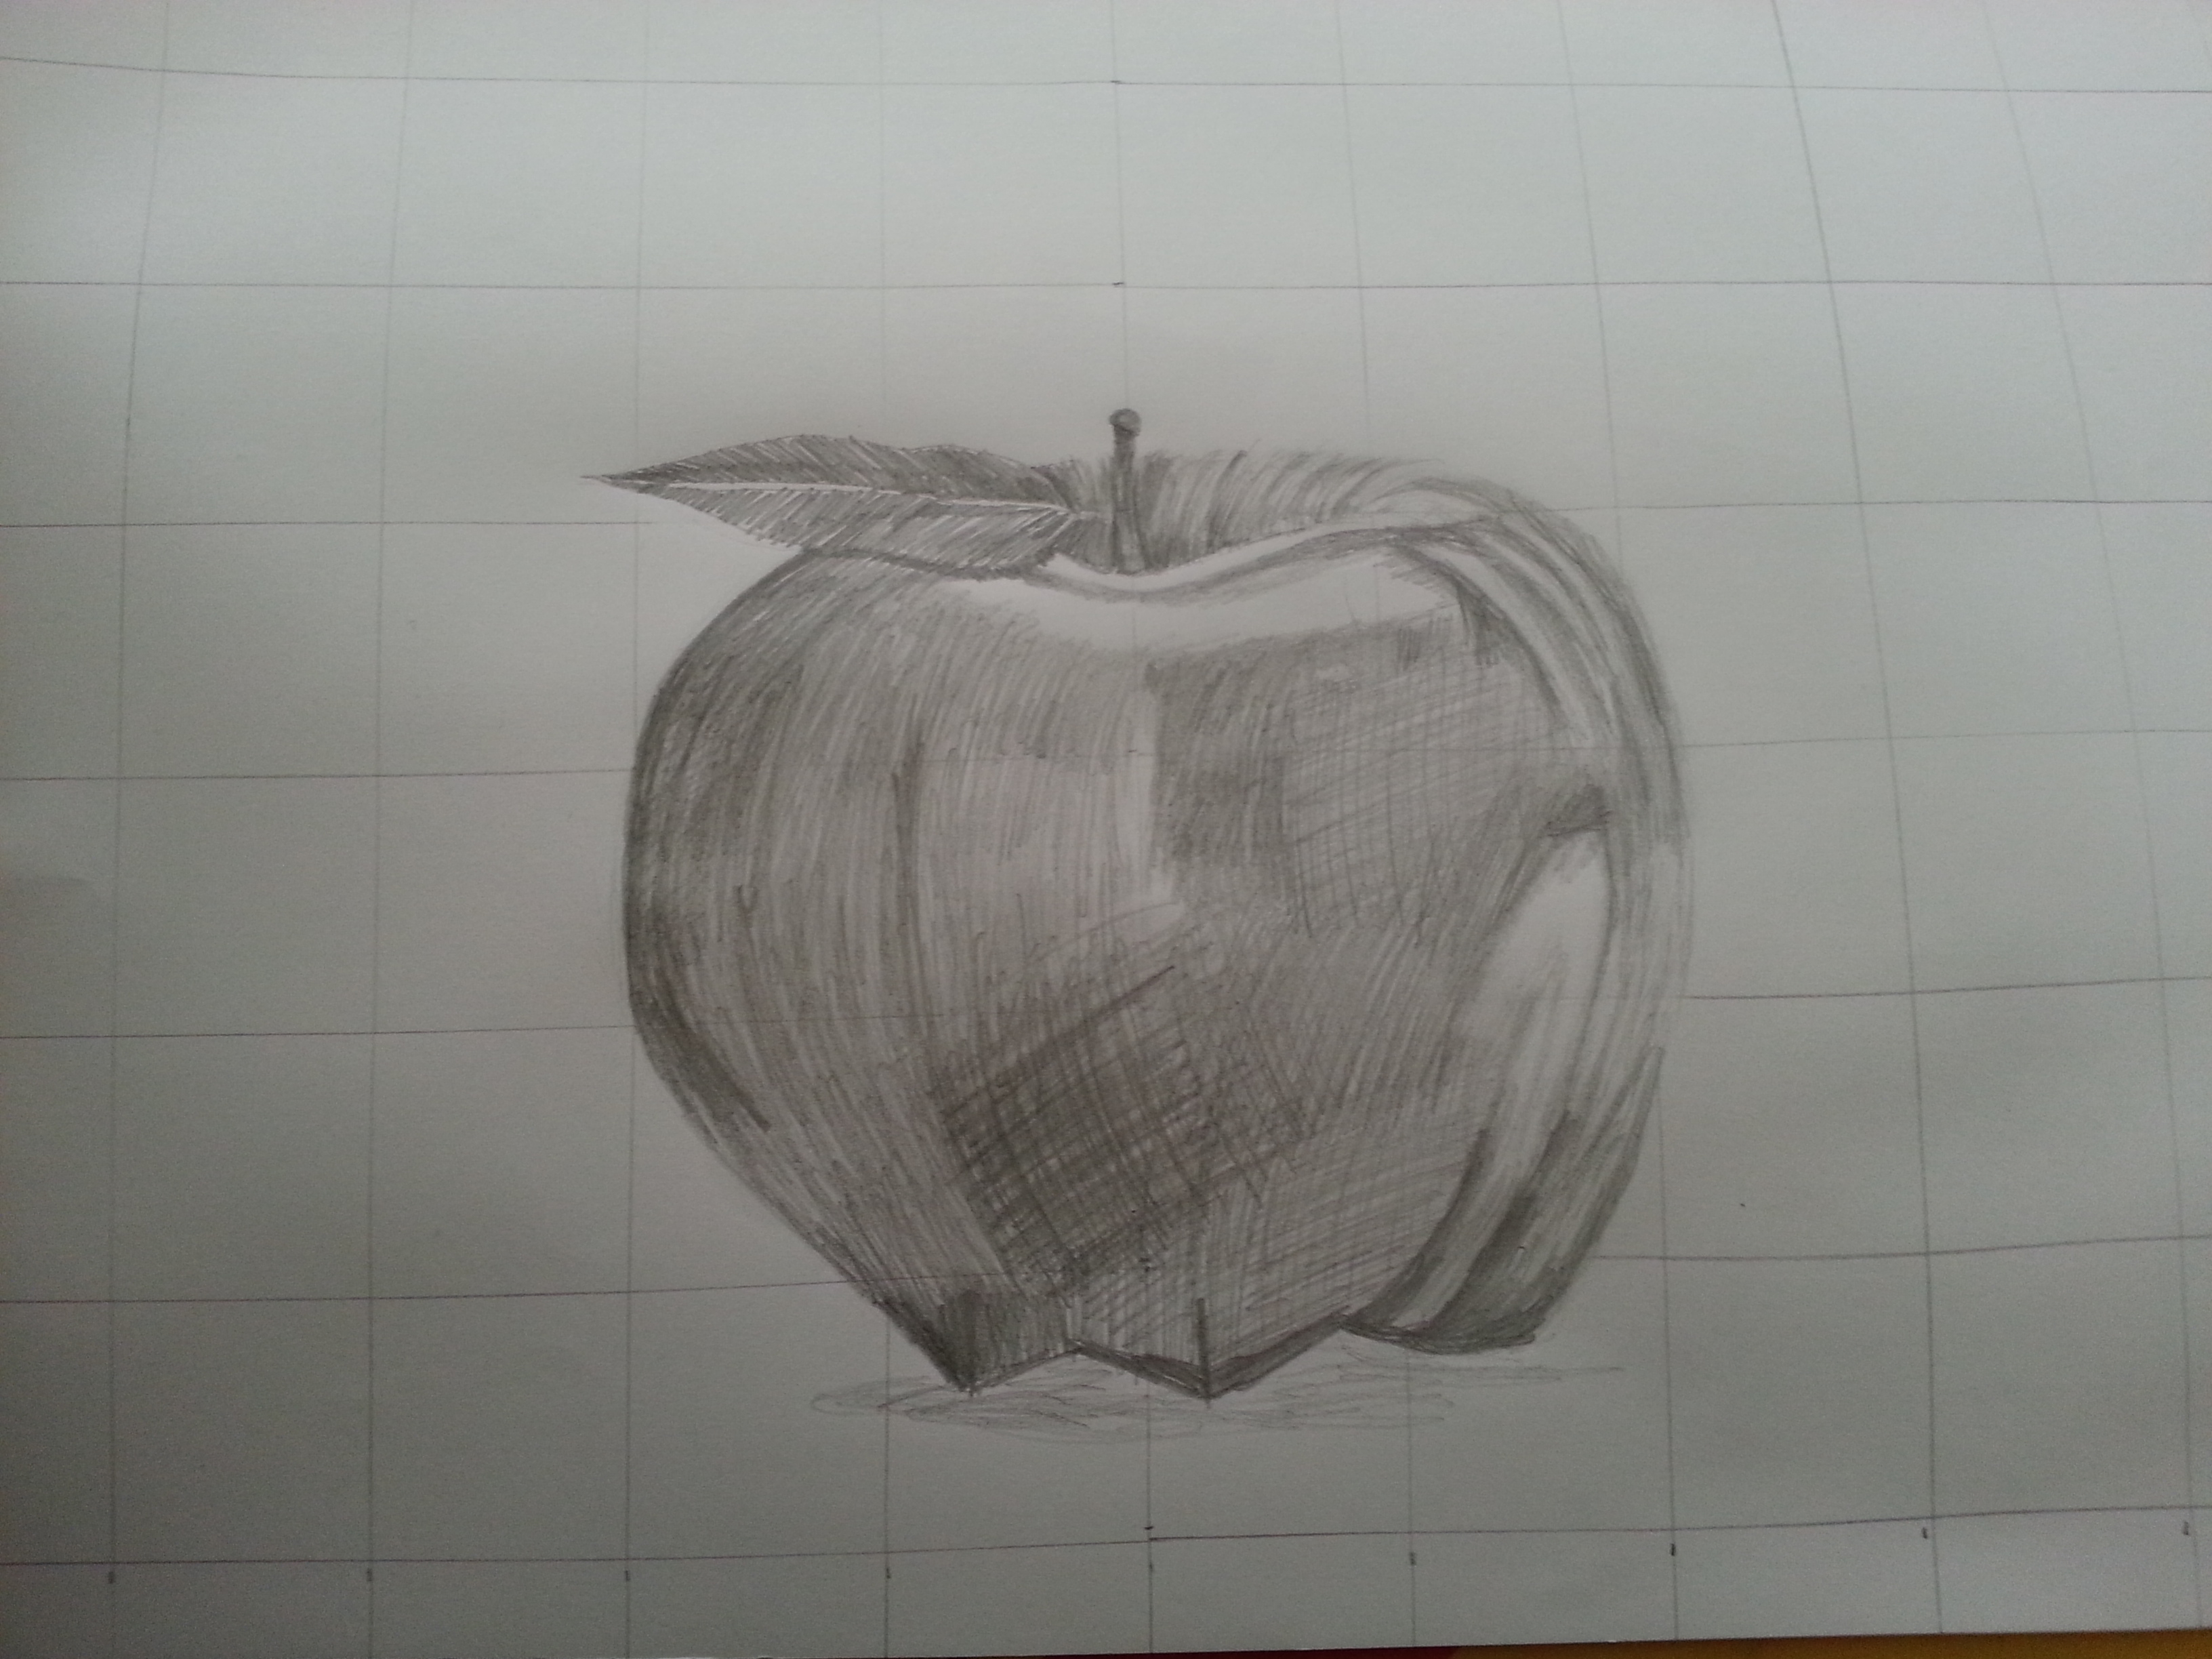 How To Draw An Apple For Kids? An Easy Step-By-Step Guide | MomJunction